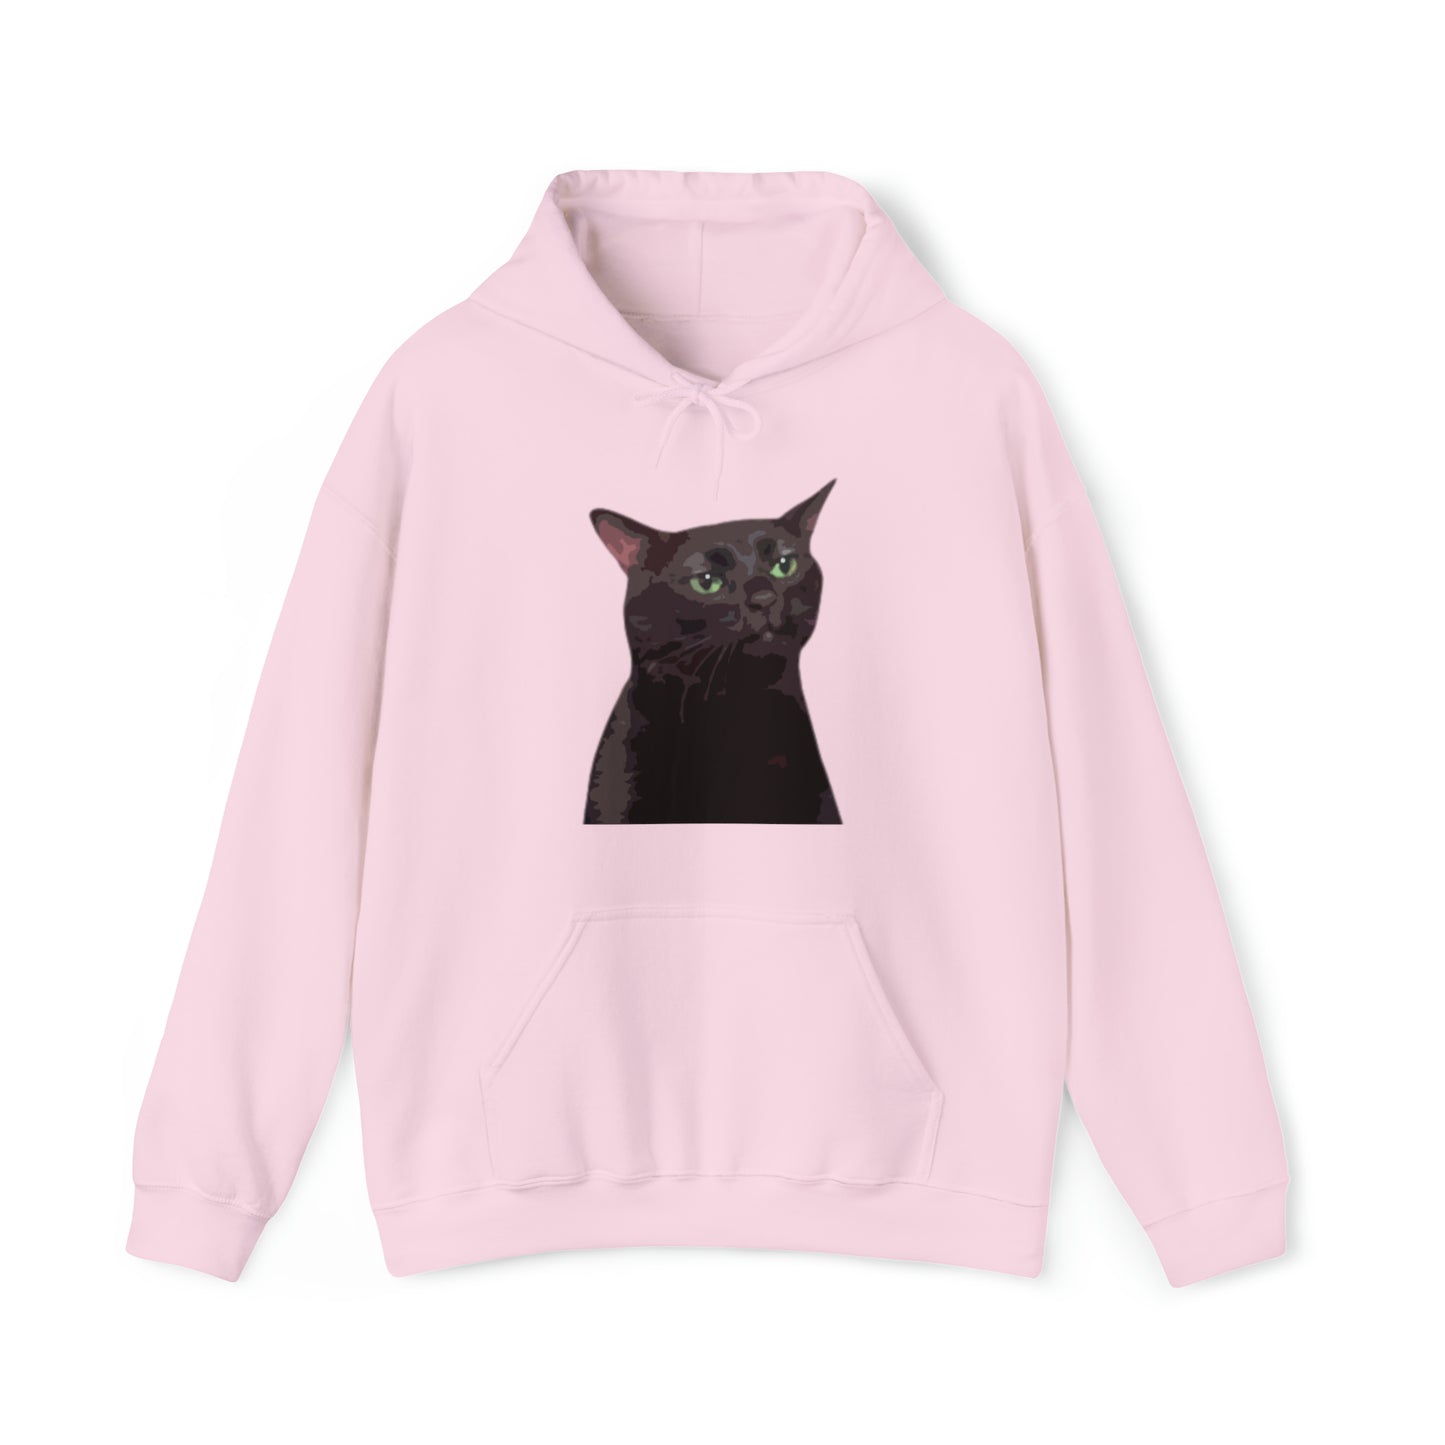 S Light Pink Black Cat Zoning Out Hoodie from HoodySZN.com